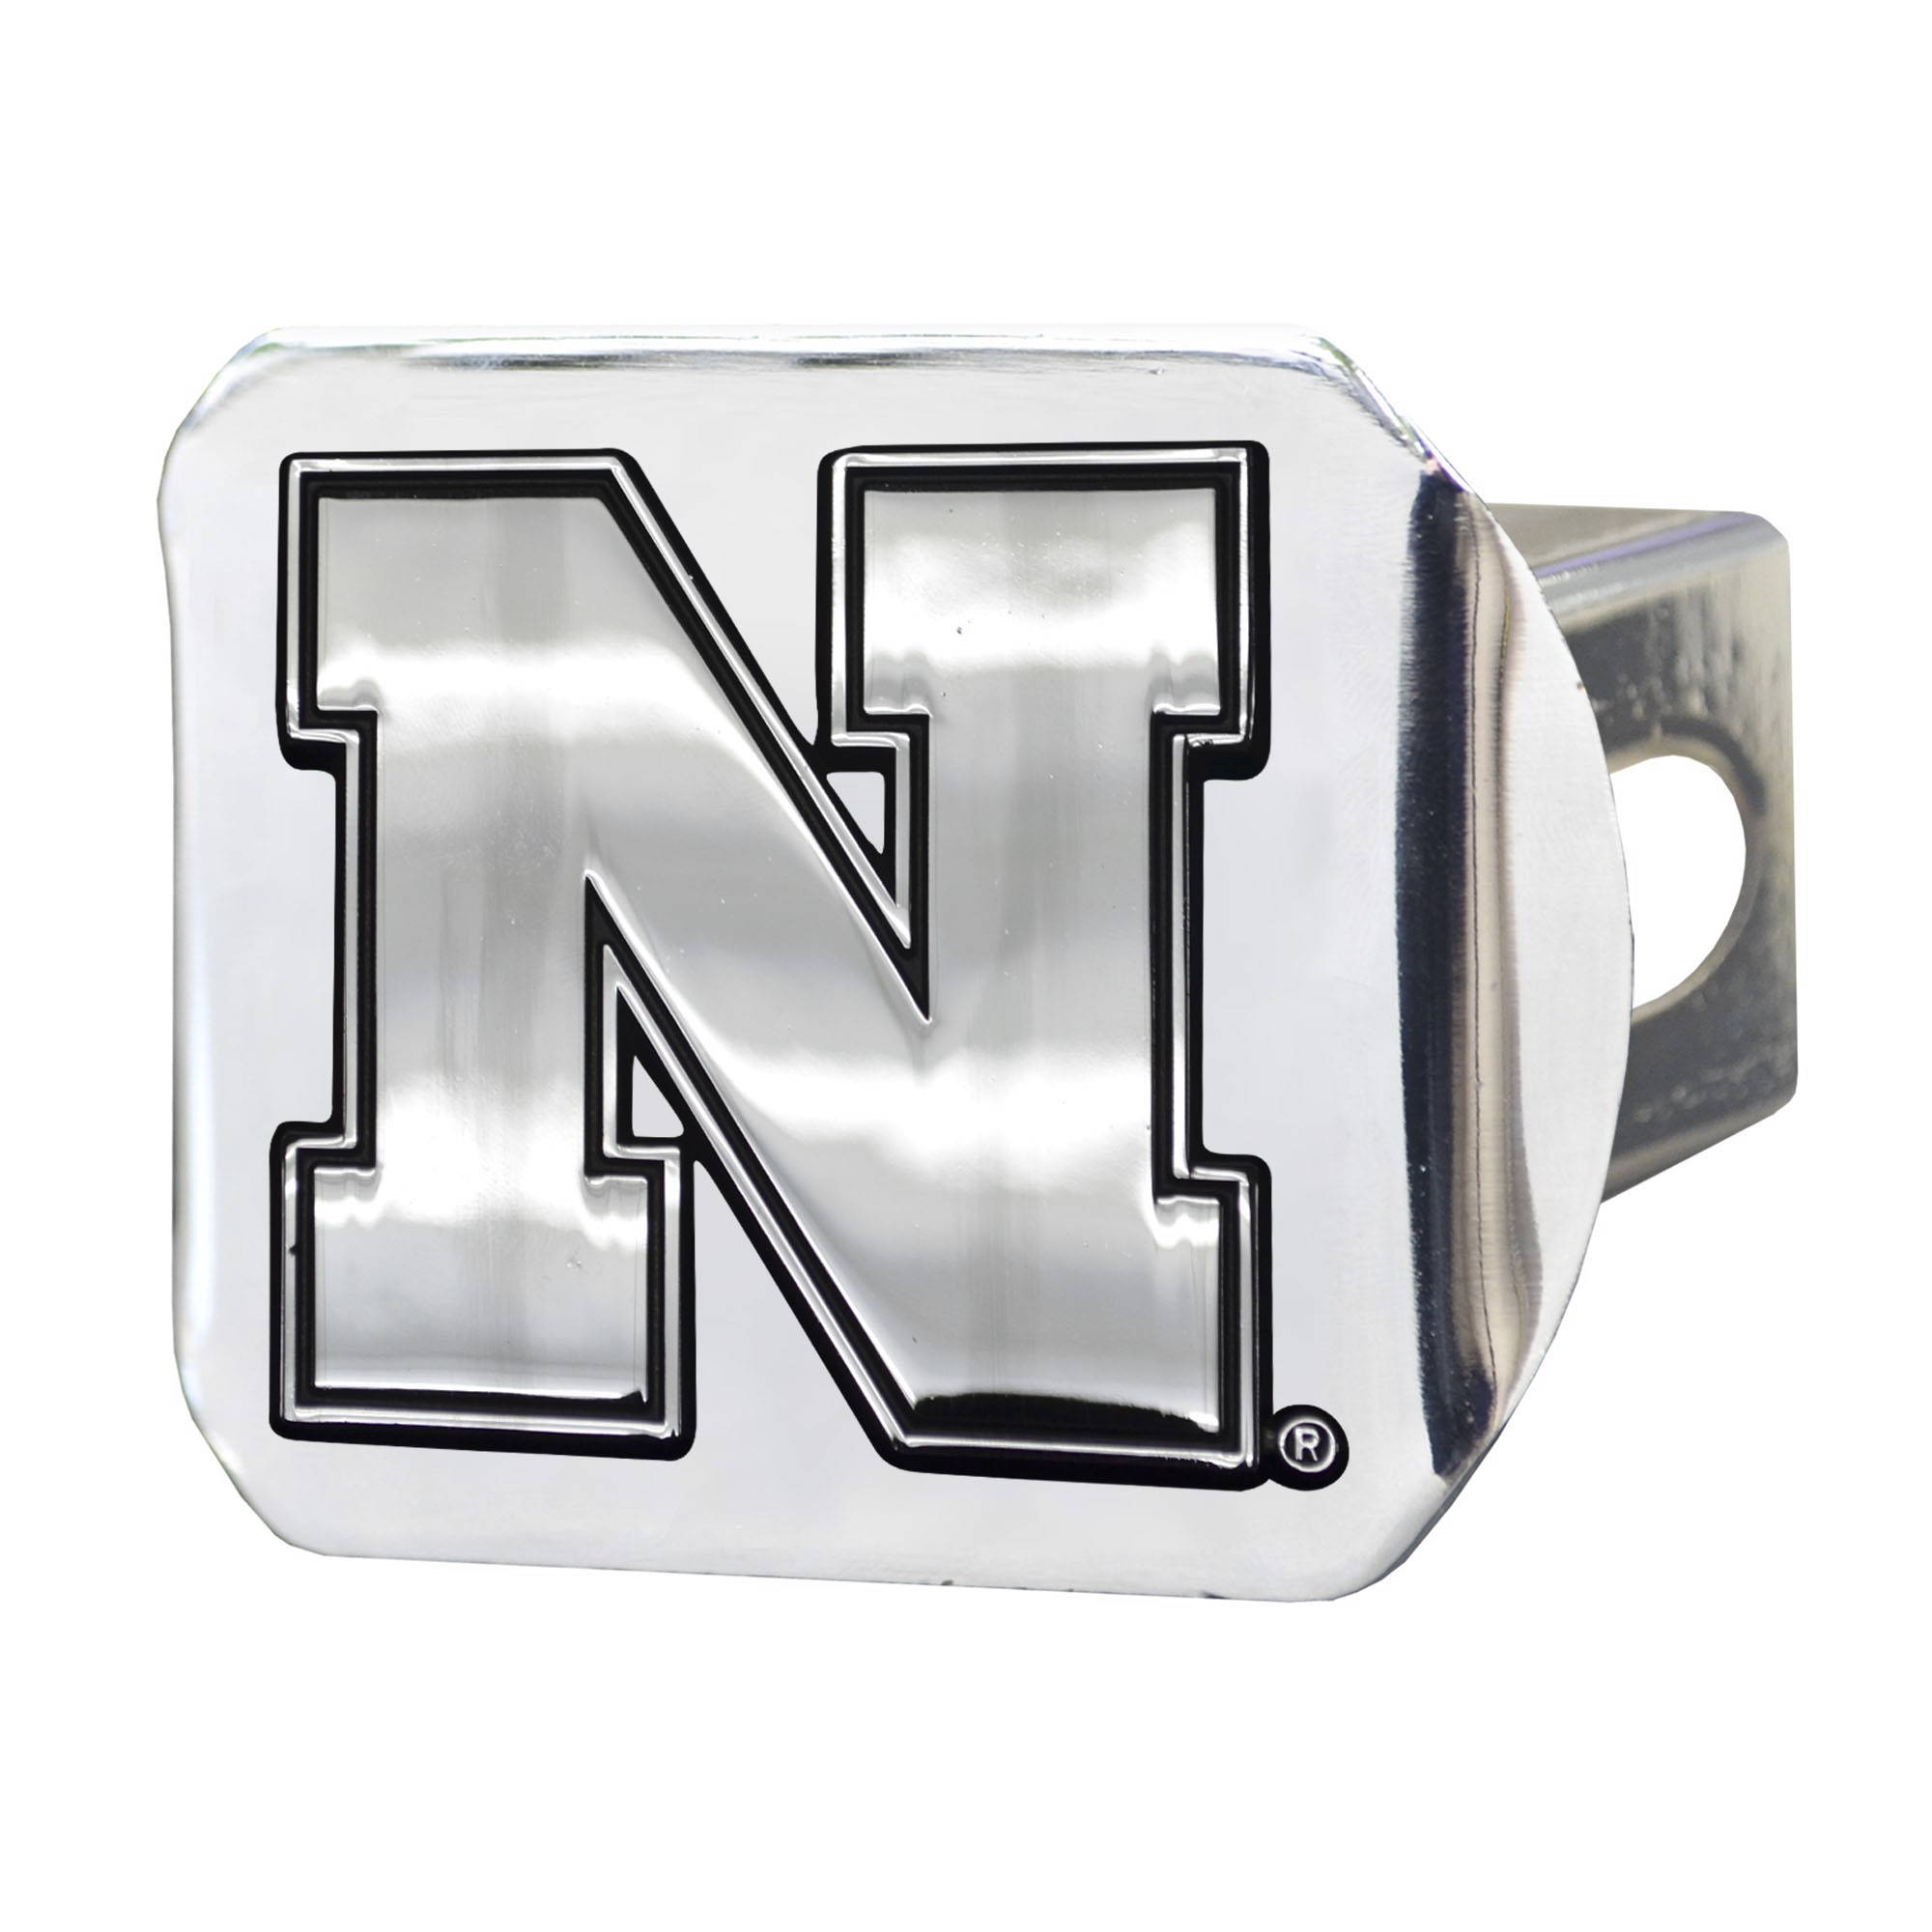 Officially Licensed NCAA Louisville Cardinals Chrome Metal Hitch Cover